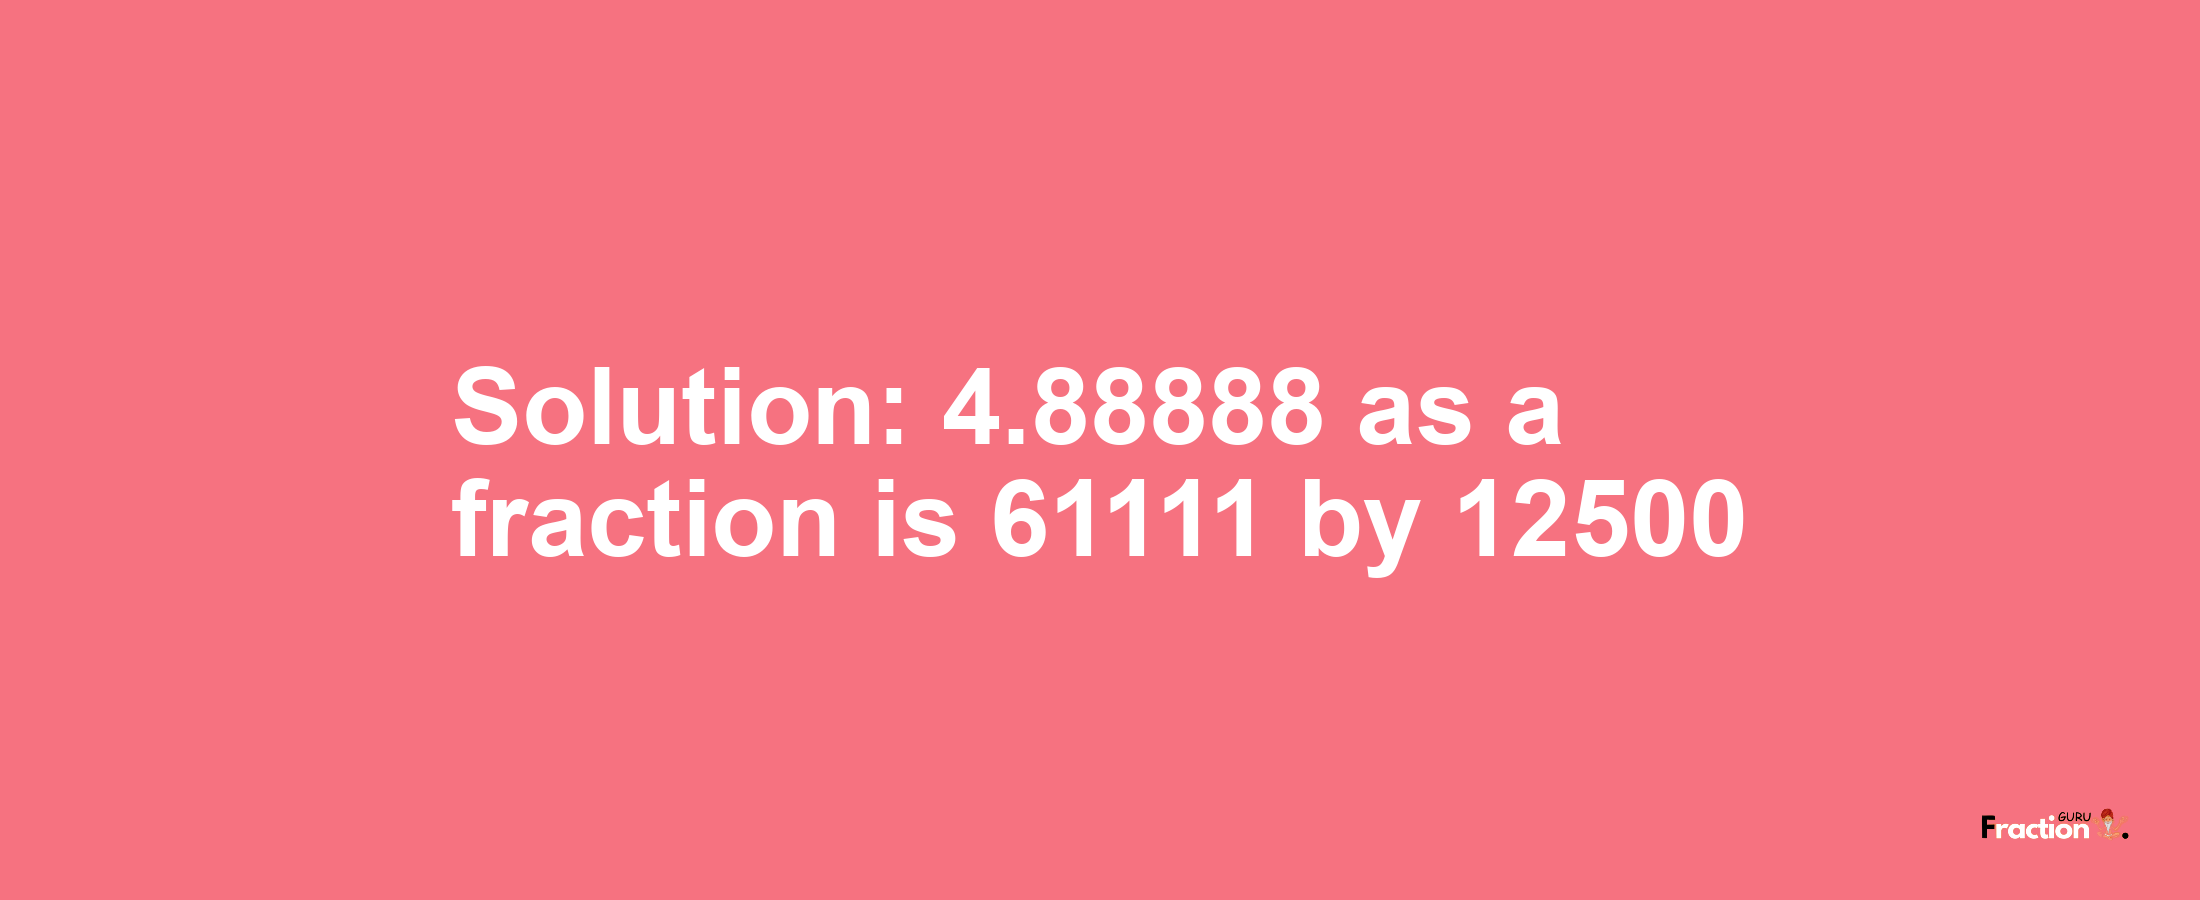 Solution:4.88888 as a fraction is 61111/12500